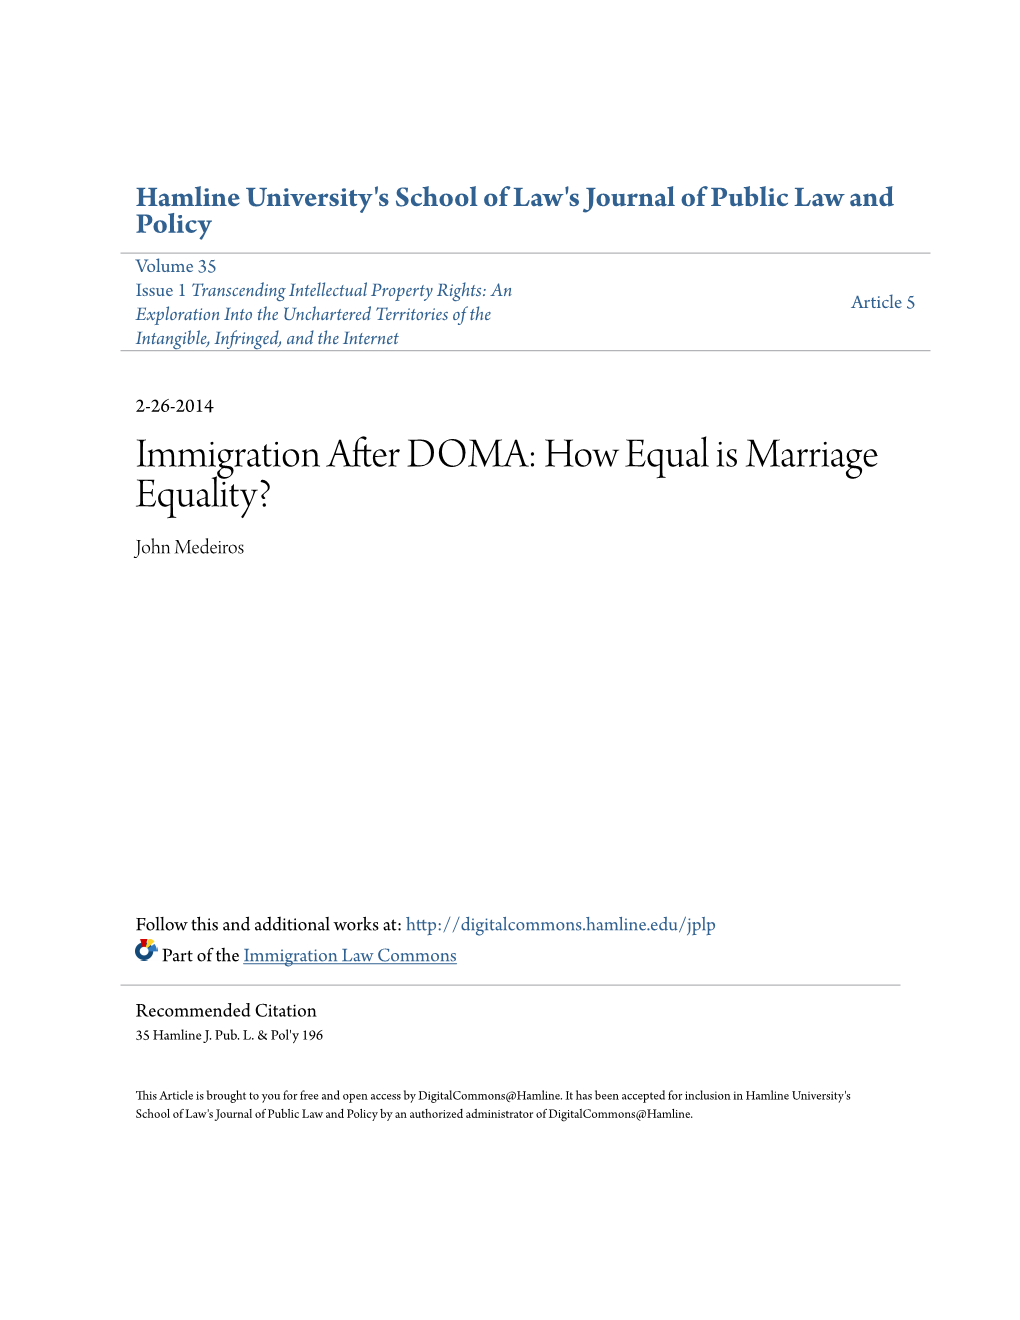 Immigration After DOMA: How Equal Is Marriage Equality? John Medeiros